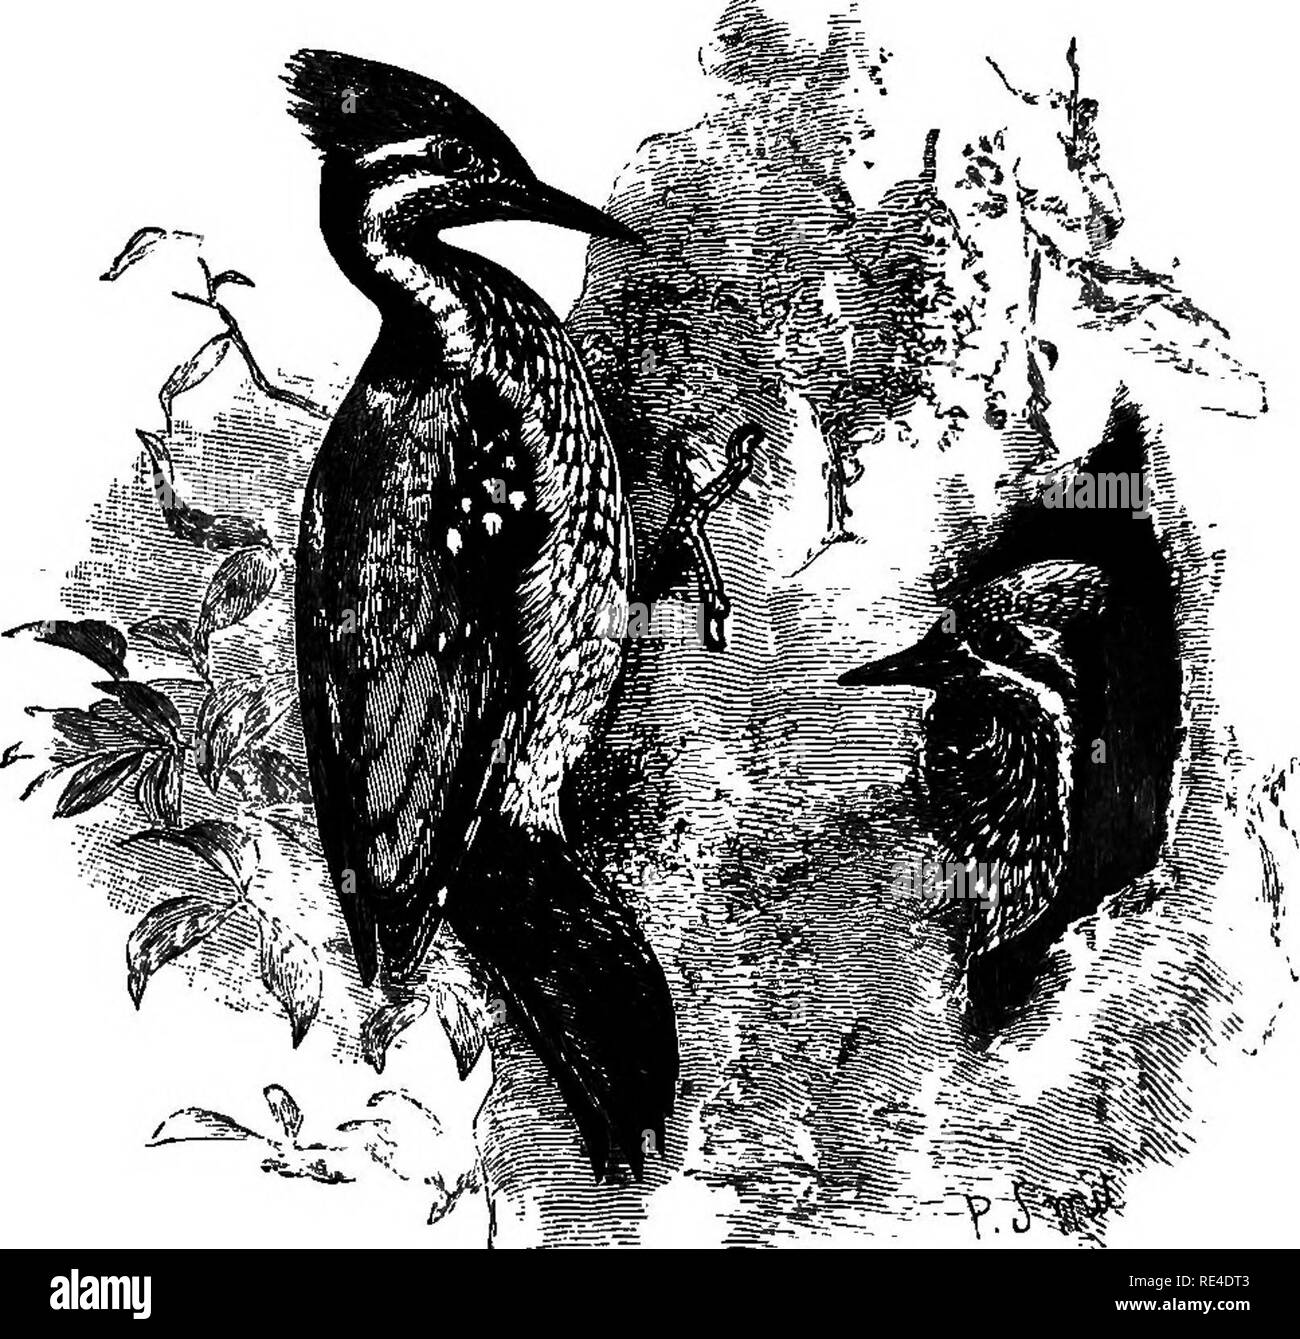 . Birds. Birds. Fig. B.—Brachypternus awantins and nest-hole. Order III. PICI. With the Woodpeckers we commence a series of bird-families sometimes combined under the general name of Piearice, but exhibiting such complicated relations with each other and with other groups of birds that their classification is by no means finally settled. In the present work it appears best to leave them in a number of small orders, each frequently consisting, as in the present instance, of a single family. The Woodpeckers were formerly associated under the name Scansores with Barbets, Cuckoos, Parrots, and oth Stock Photo